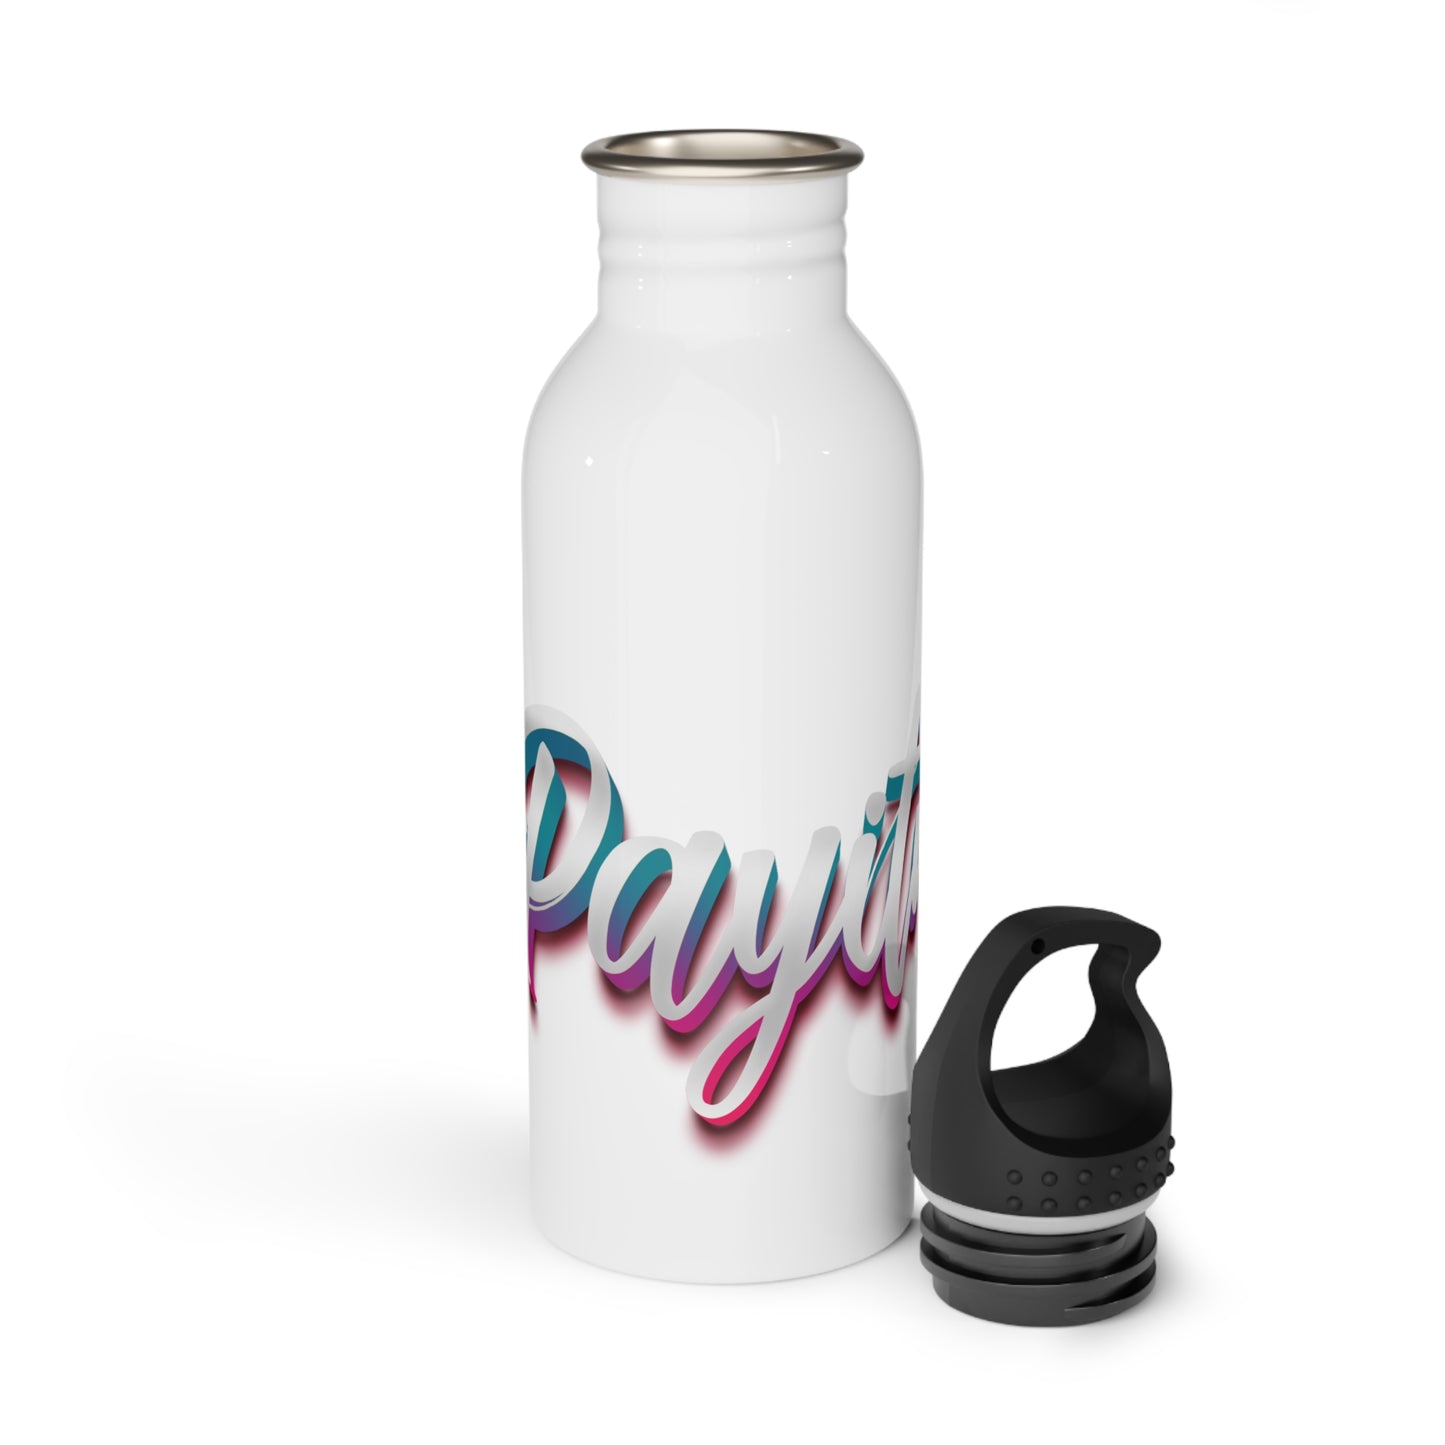 Stainless Steel Water Bottle (Pay It Now Spray Paint)